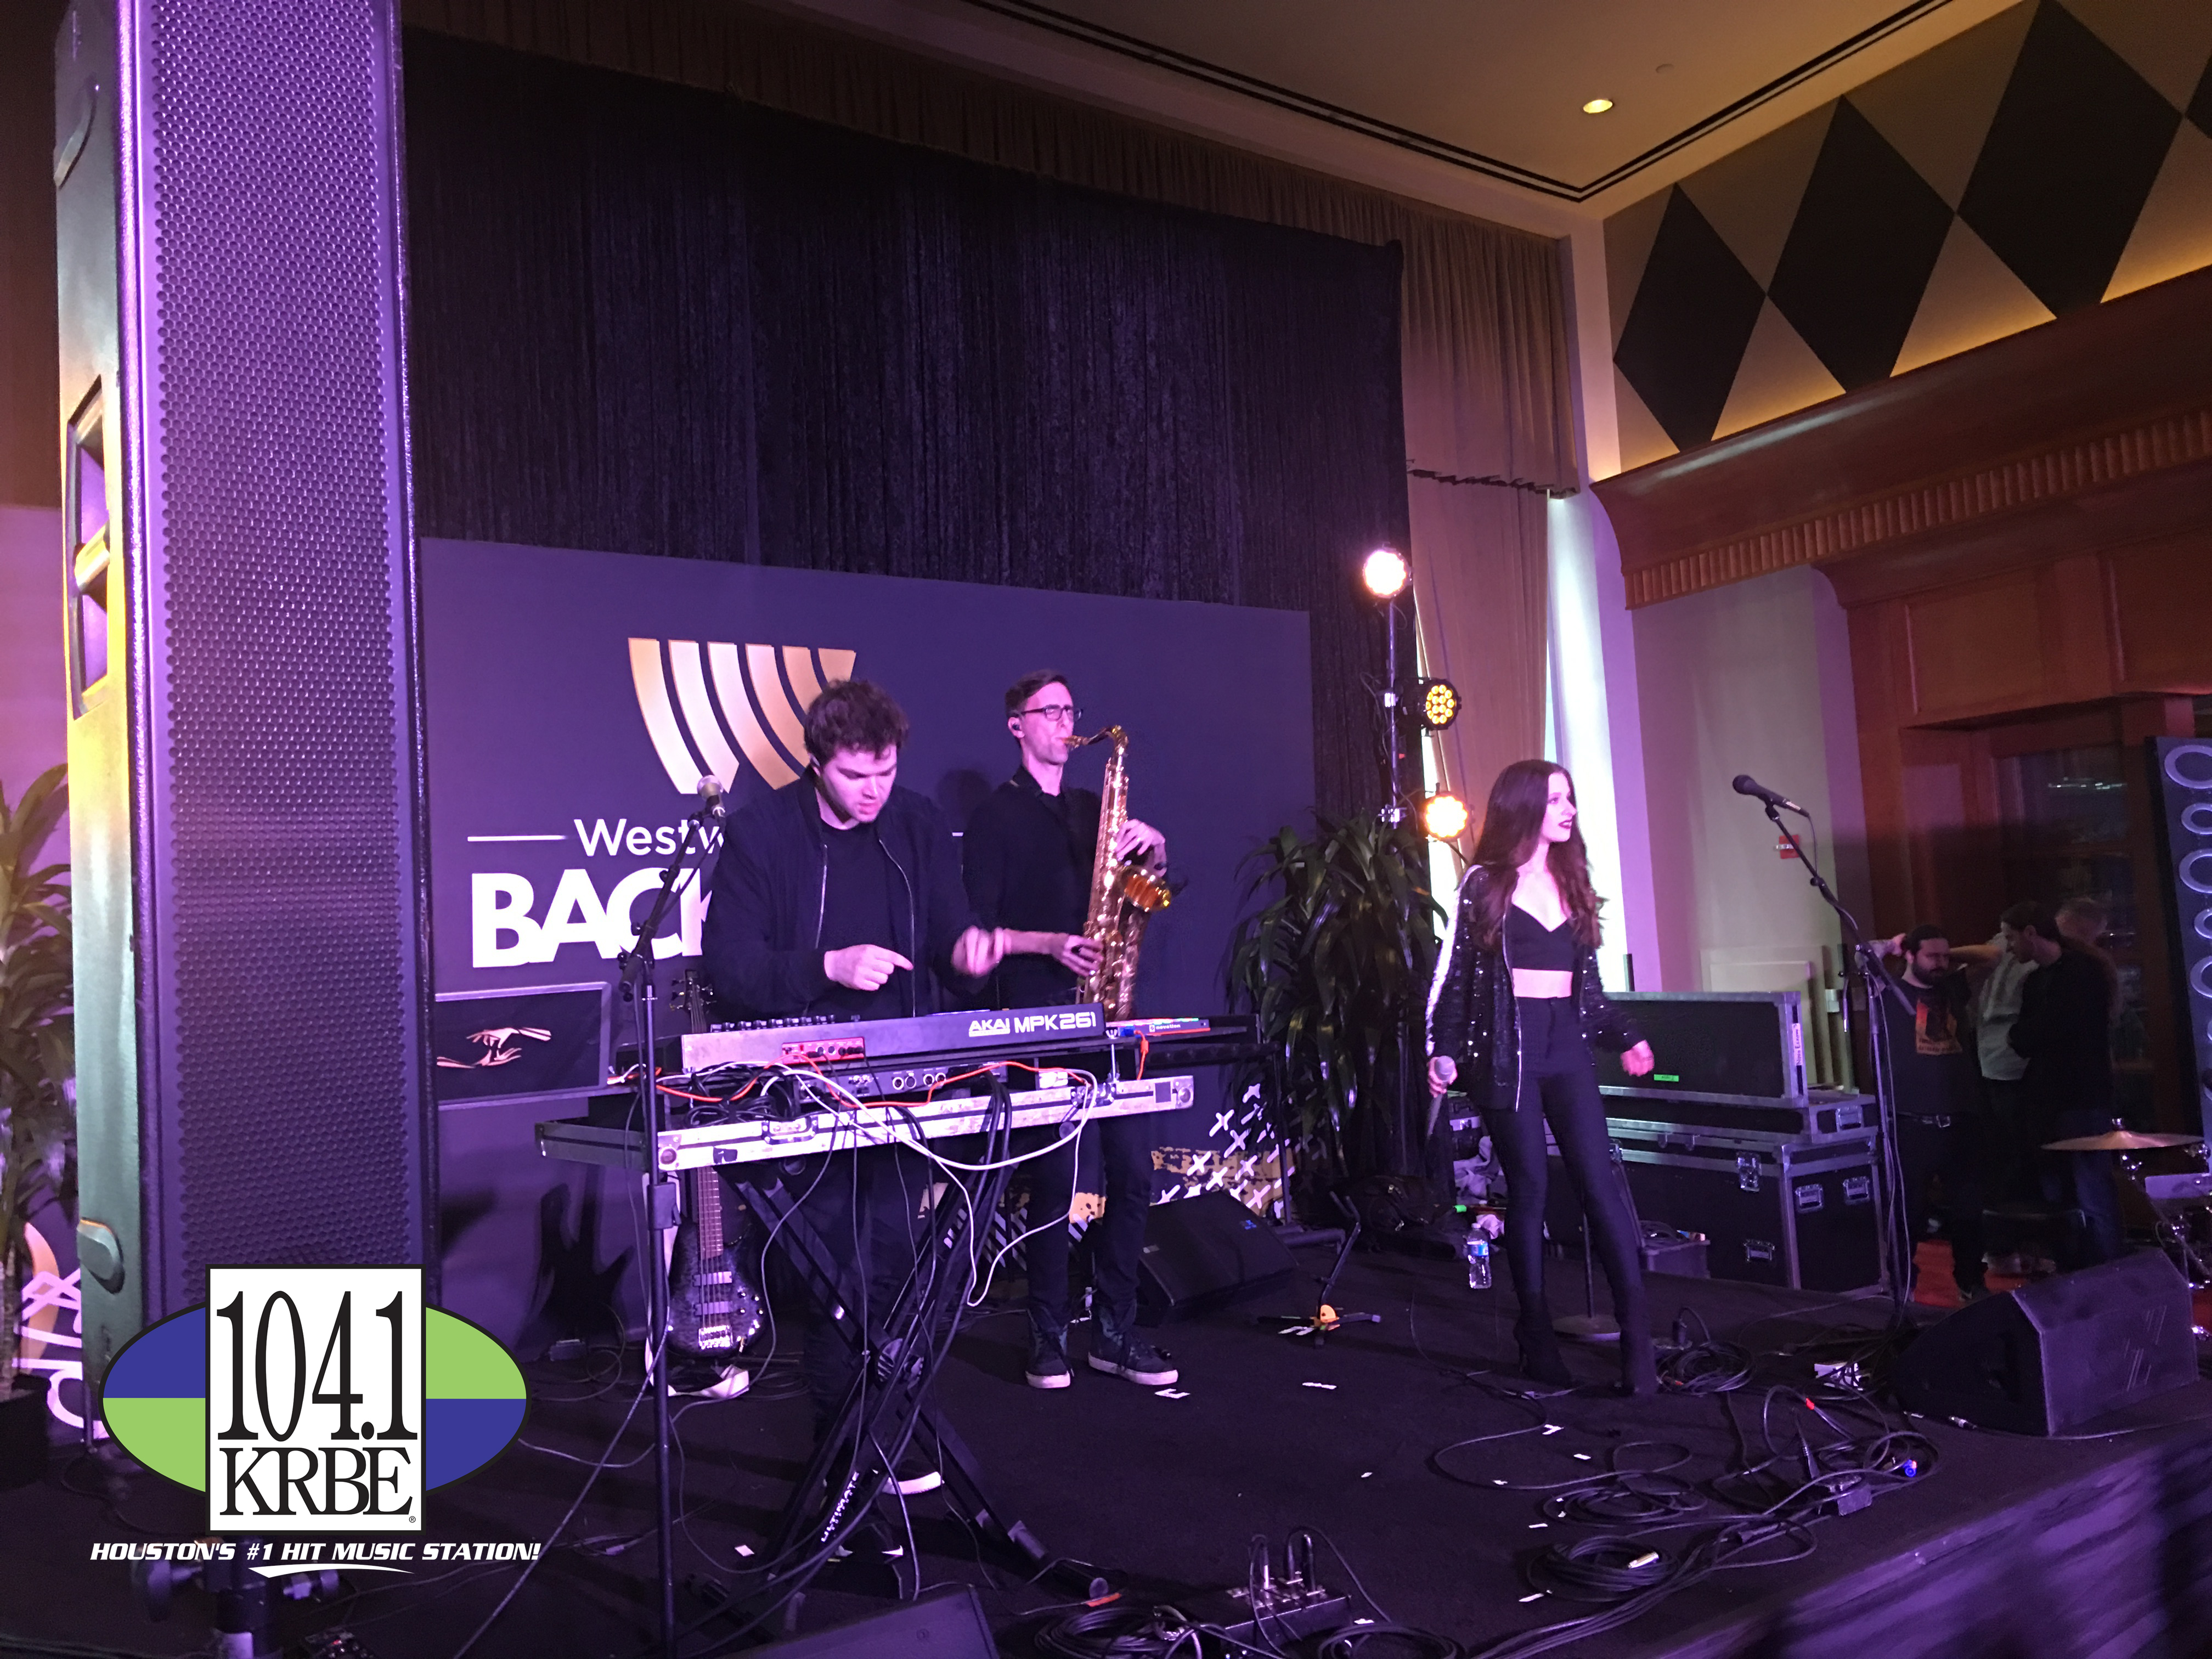 PHOTO: Marian Hill performs backstage at the Grammys. Photo courtesy of E.J. Santillan and 104.1 KRBE.